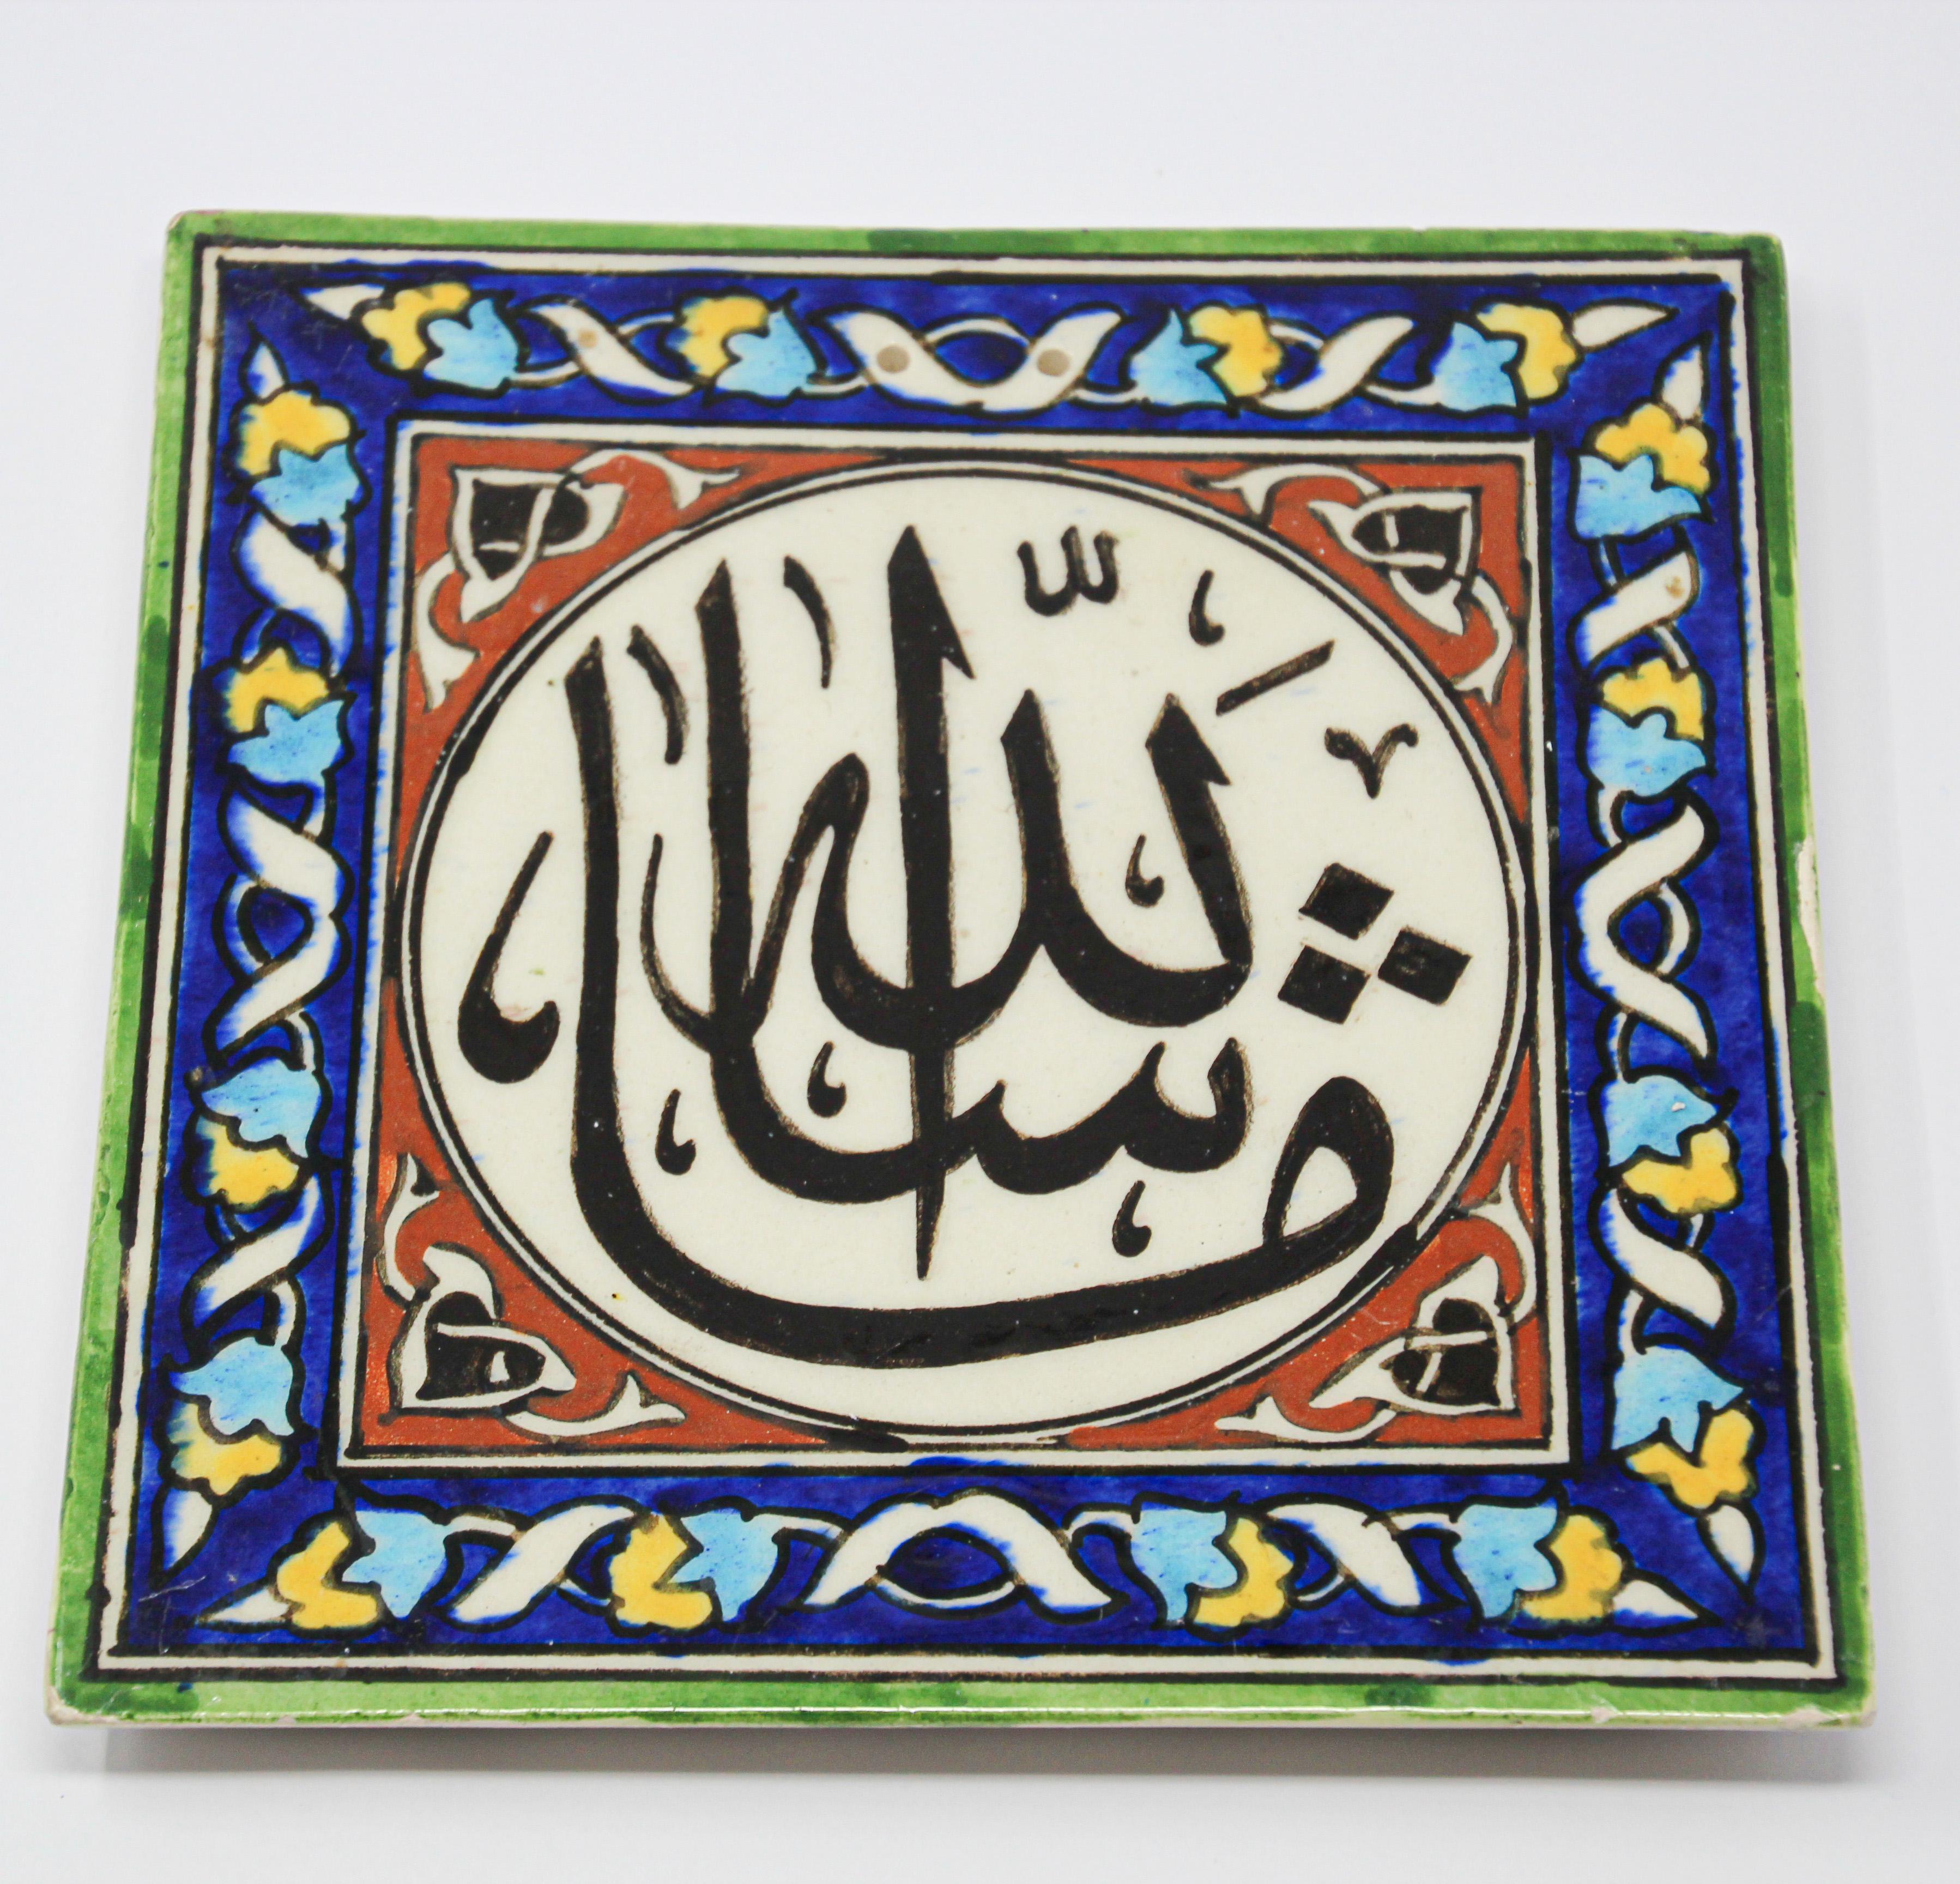 Turkish handcrafted decorative tile with hand painted Islamic Koranic blessing and floral design.
Ceramic Islamic tile hand painted with Arabic Islamic writing and flowers.
Writing in Arabic says the following.
